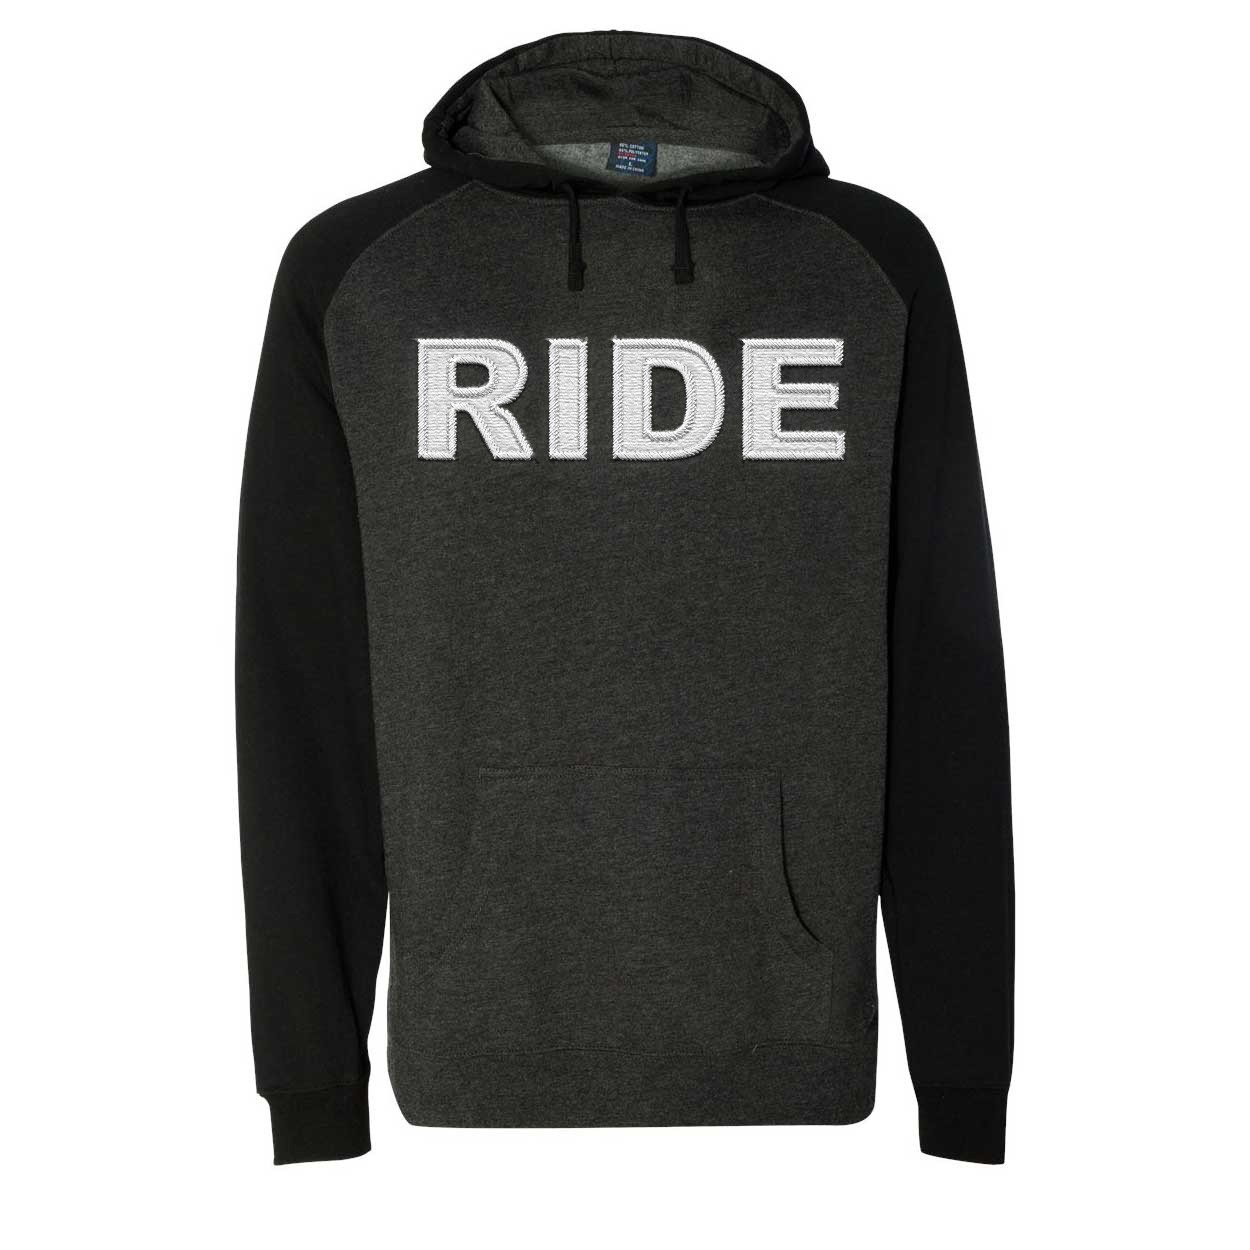 Ride Brand Logo Pro Tackle Twill Embroidered Hooded Sweatshirt Charcoal Heather/Black